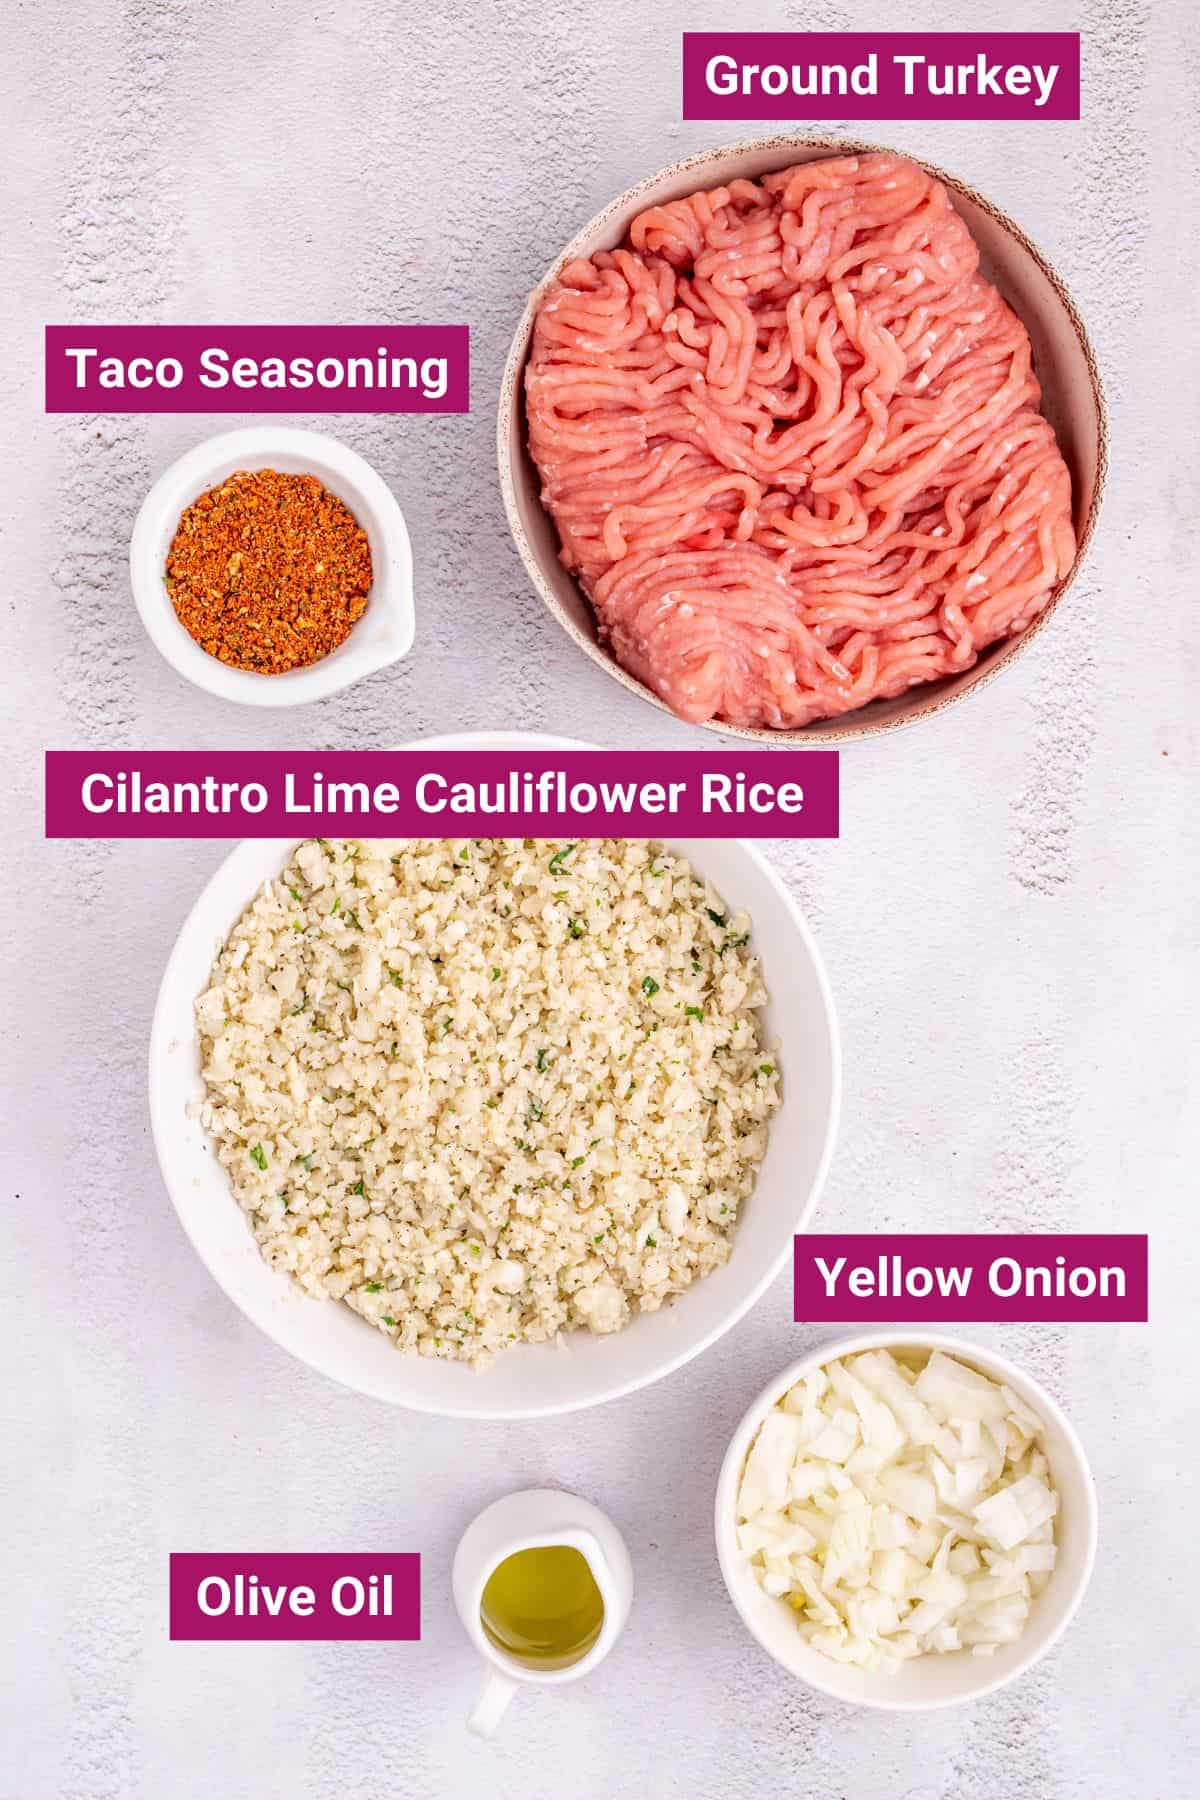 ingredients for a turkey taco bowl like Ground Turkey, Yellow onion, homemade Taco Seasoning, Olive Oil, and Cilantro Lime Cauliflower Rice in separate bowls